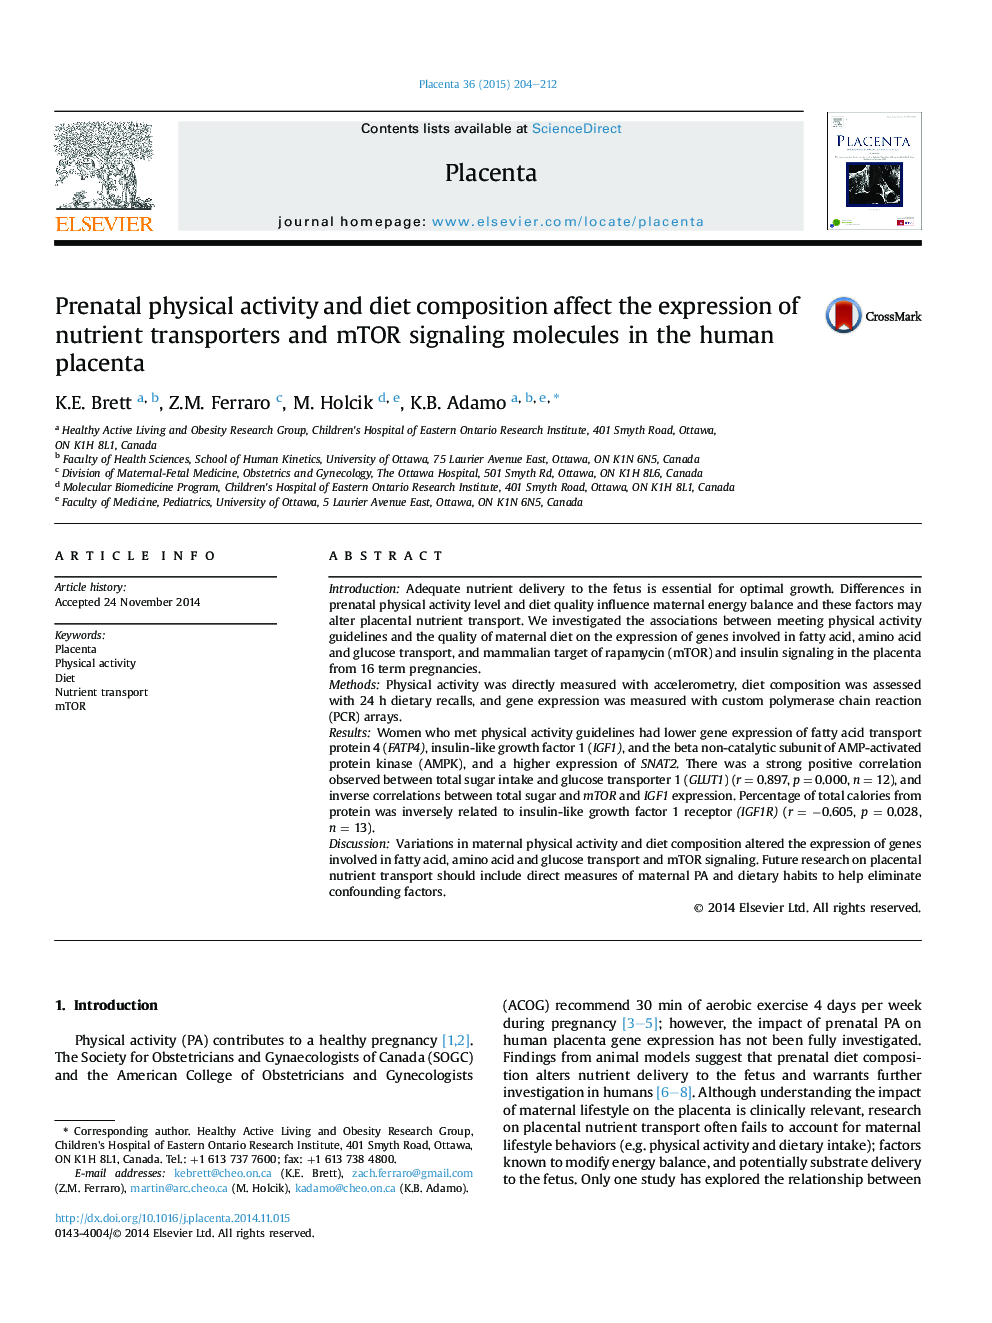 Prenatal physical activity and diet composition affect the expression of nutrient transporters and mTOR signaling molecules in the human placenta